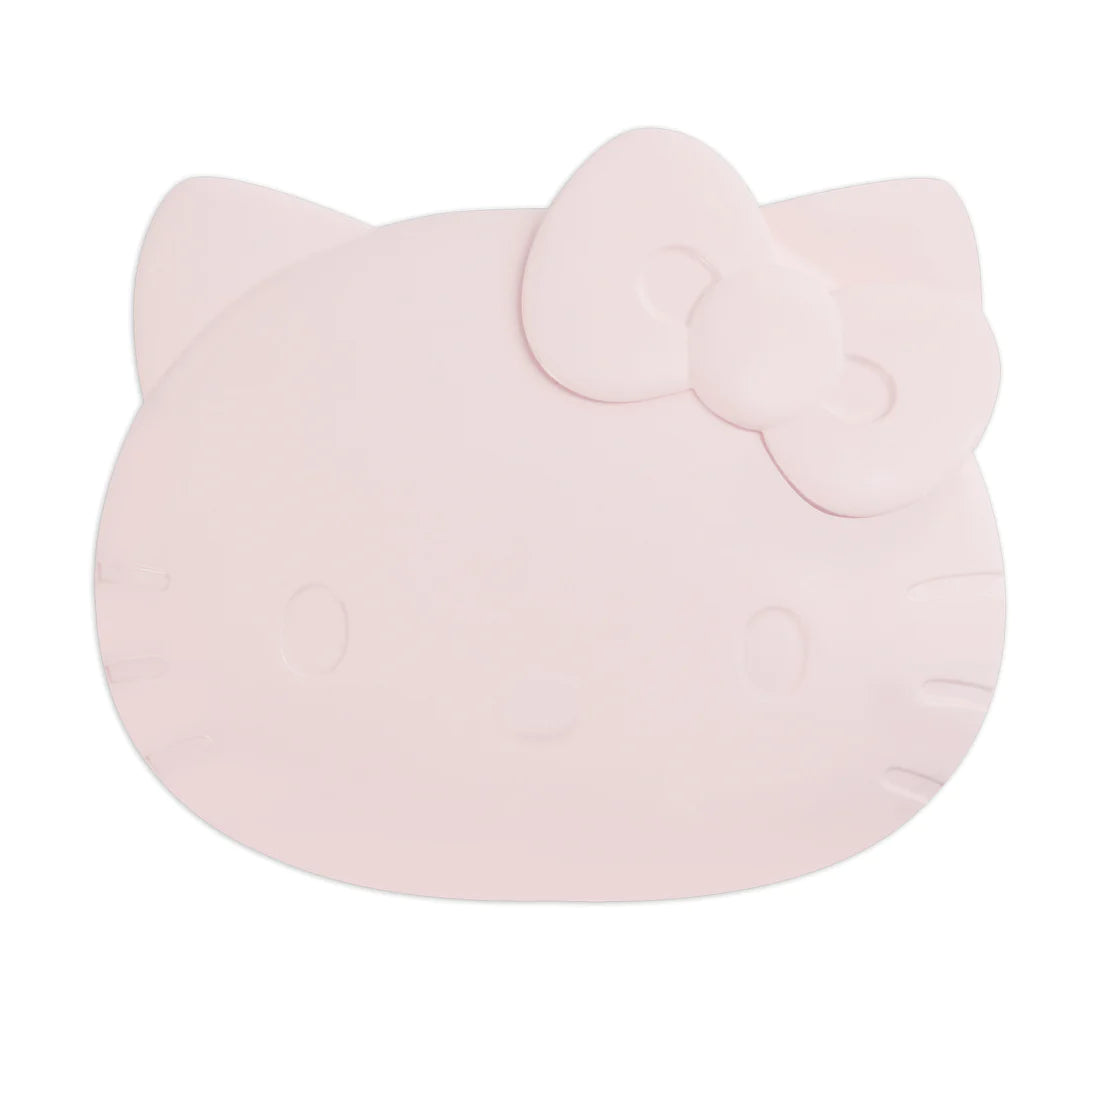 Impressions Vanity - Hello Kitty Kawaii Battery Compact Mirror with Special Finish